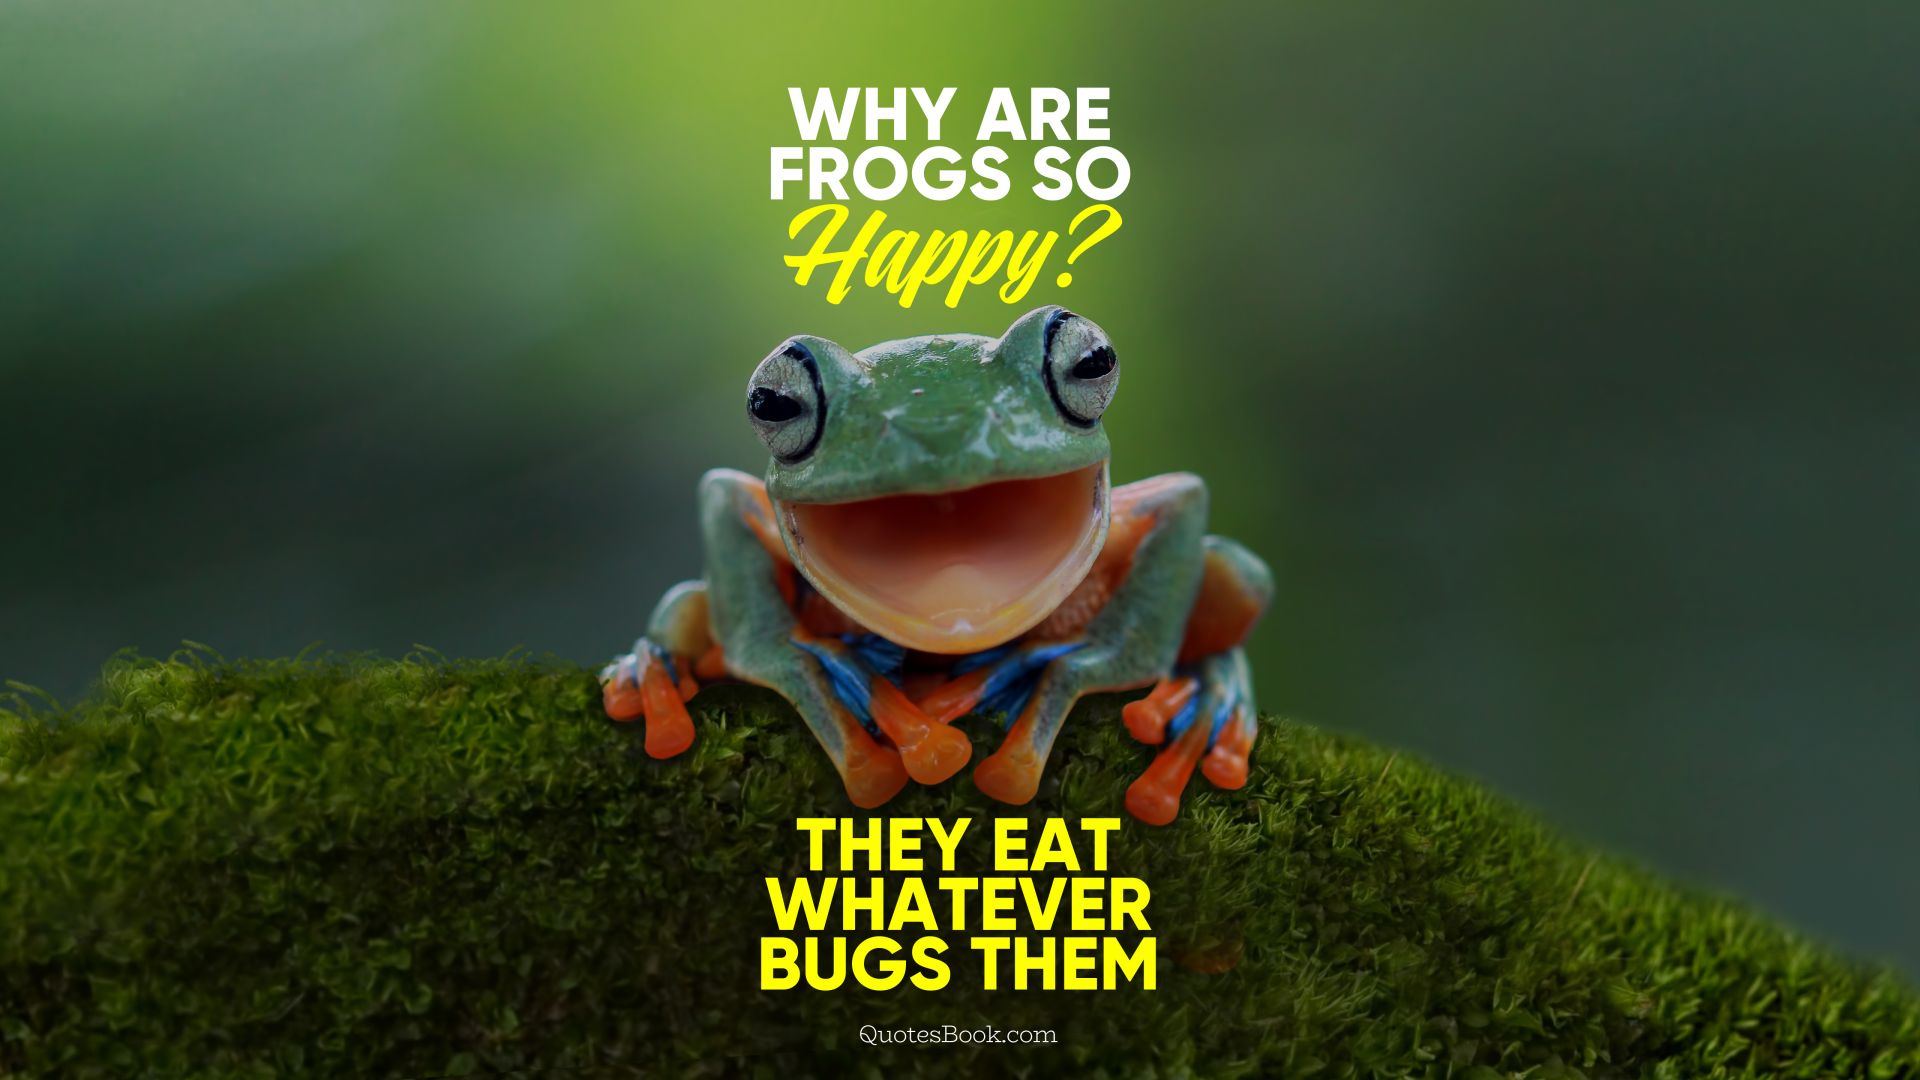 Why are frogs so happy? They eat whatever bugs them